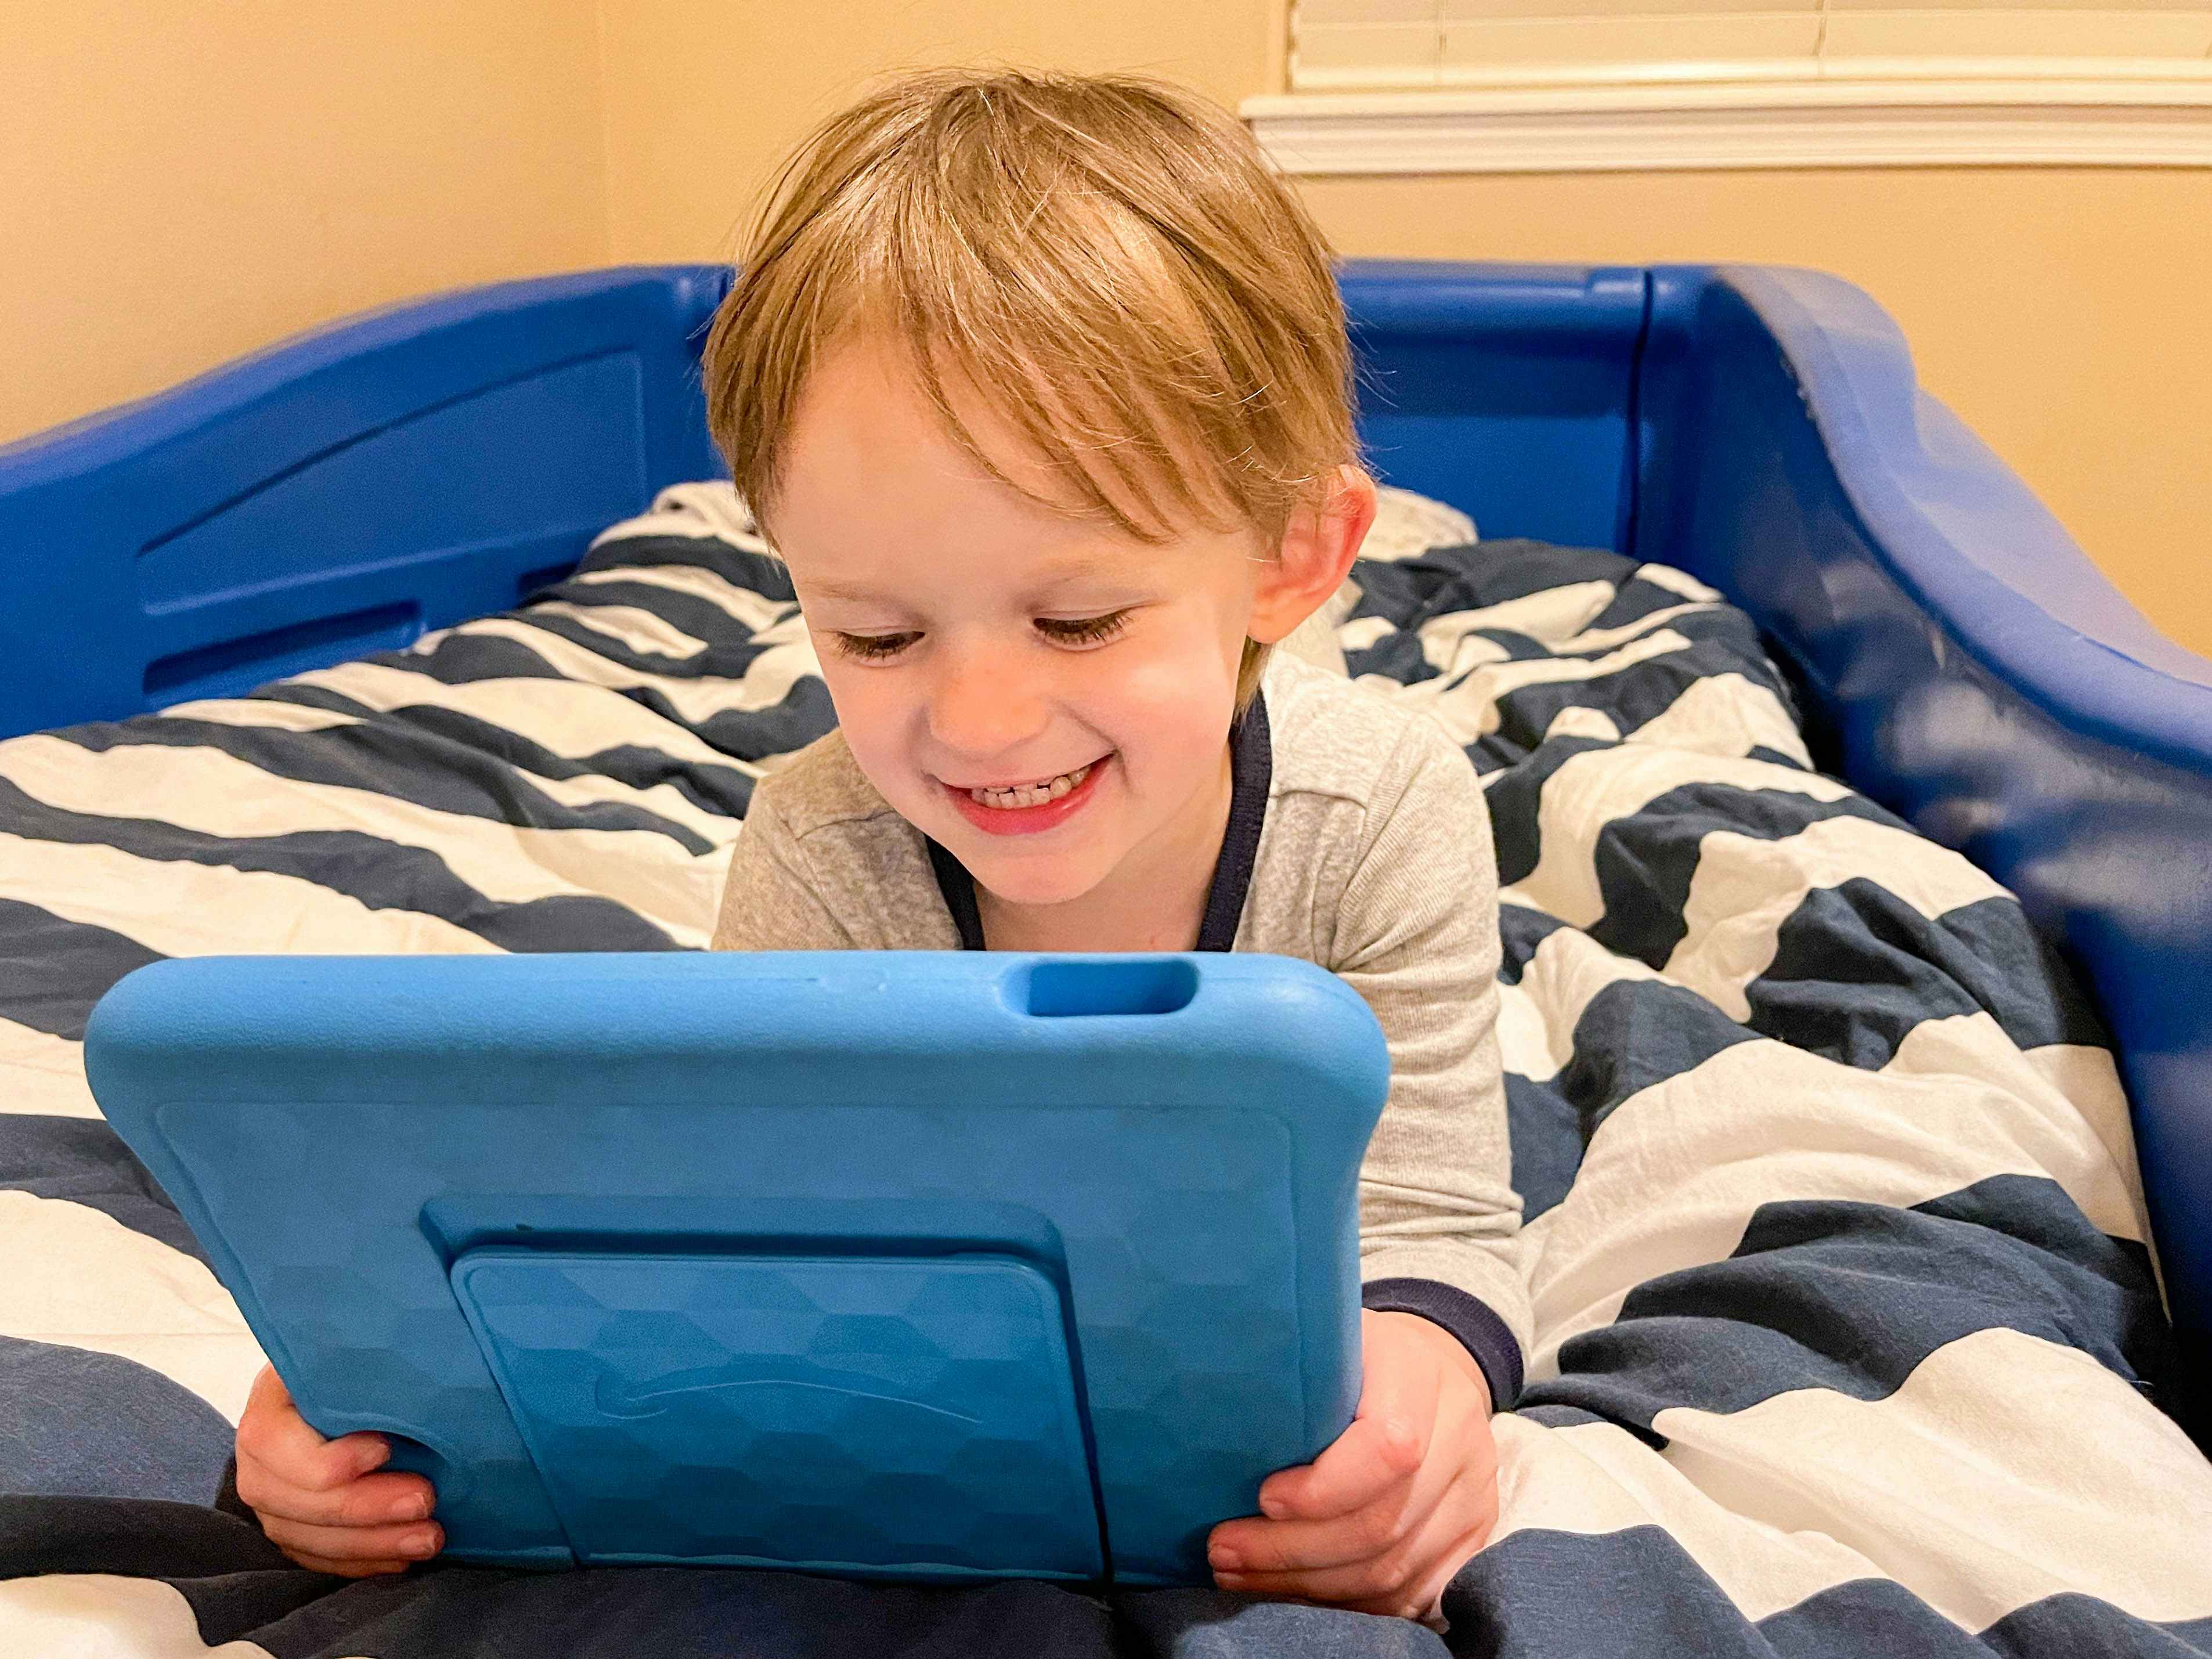 A little boy laying on a bed, watching something on an Amazon Fire tablet.